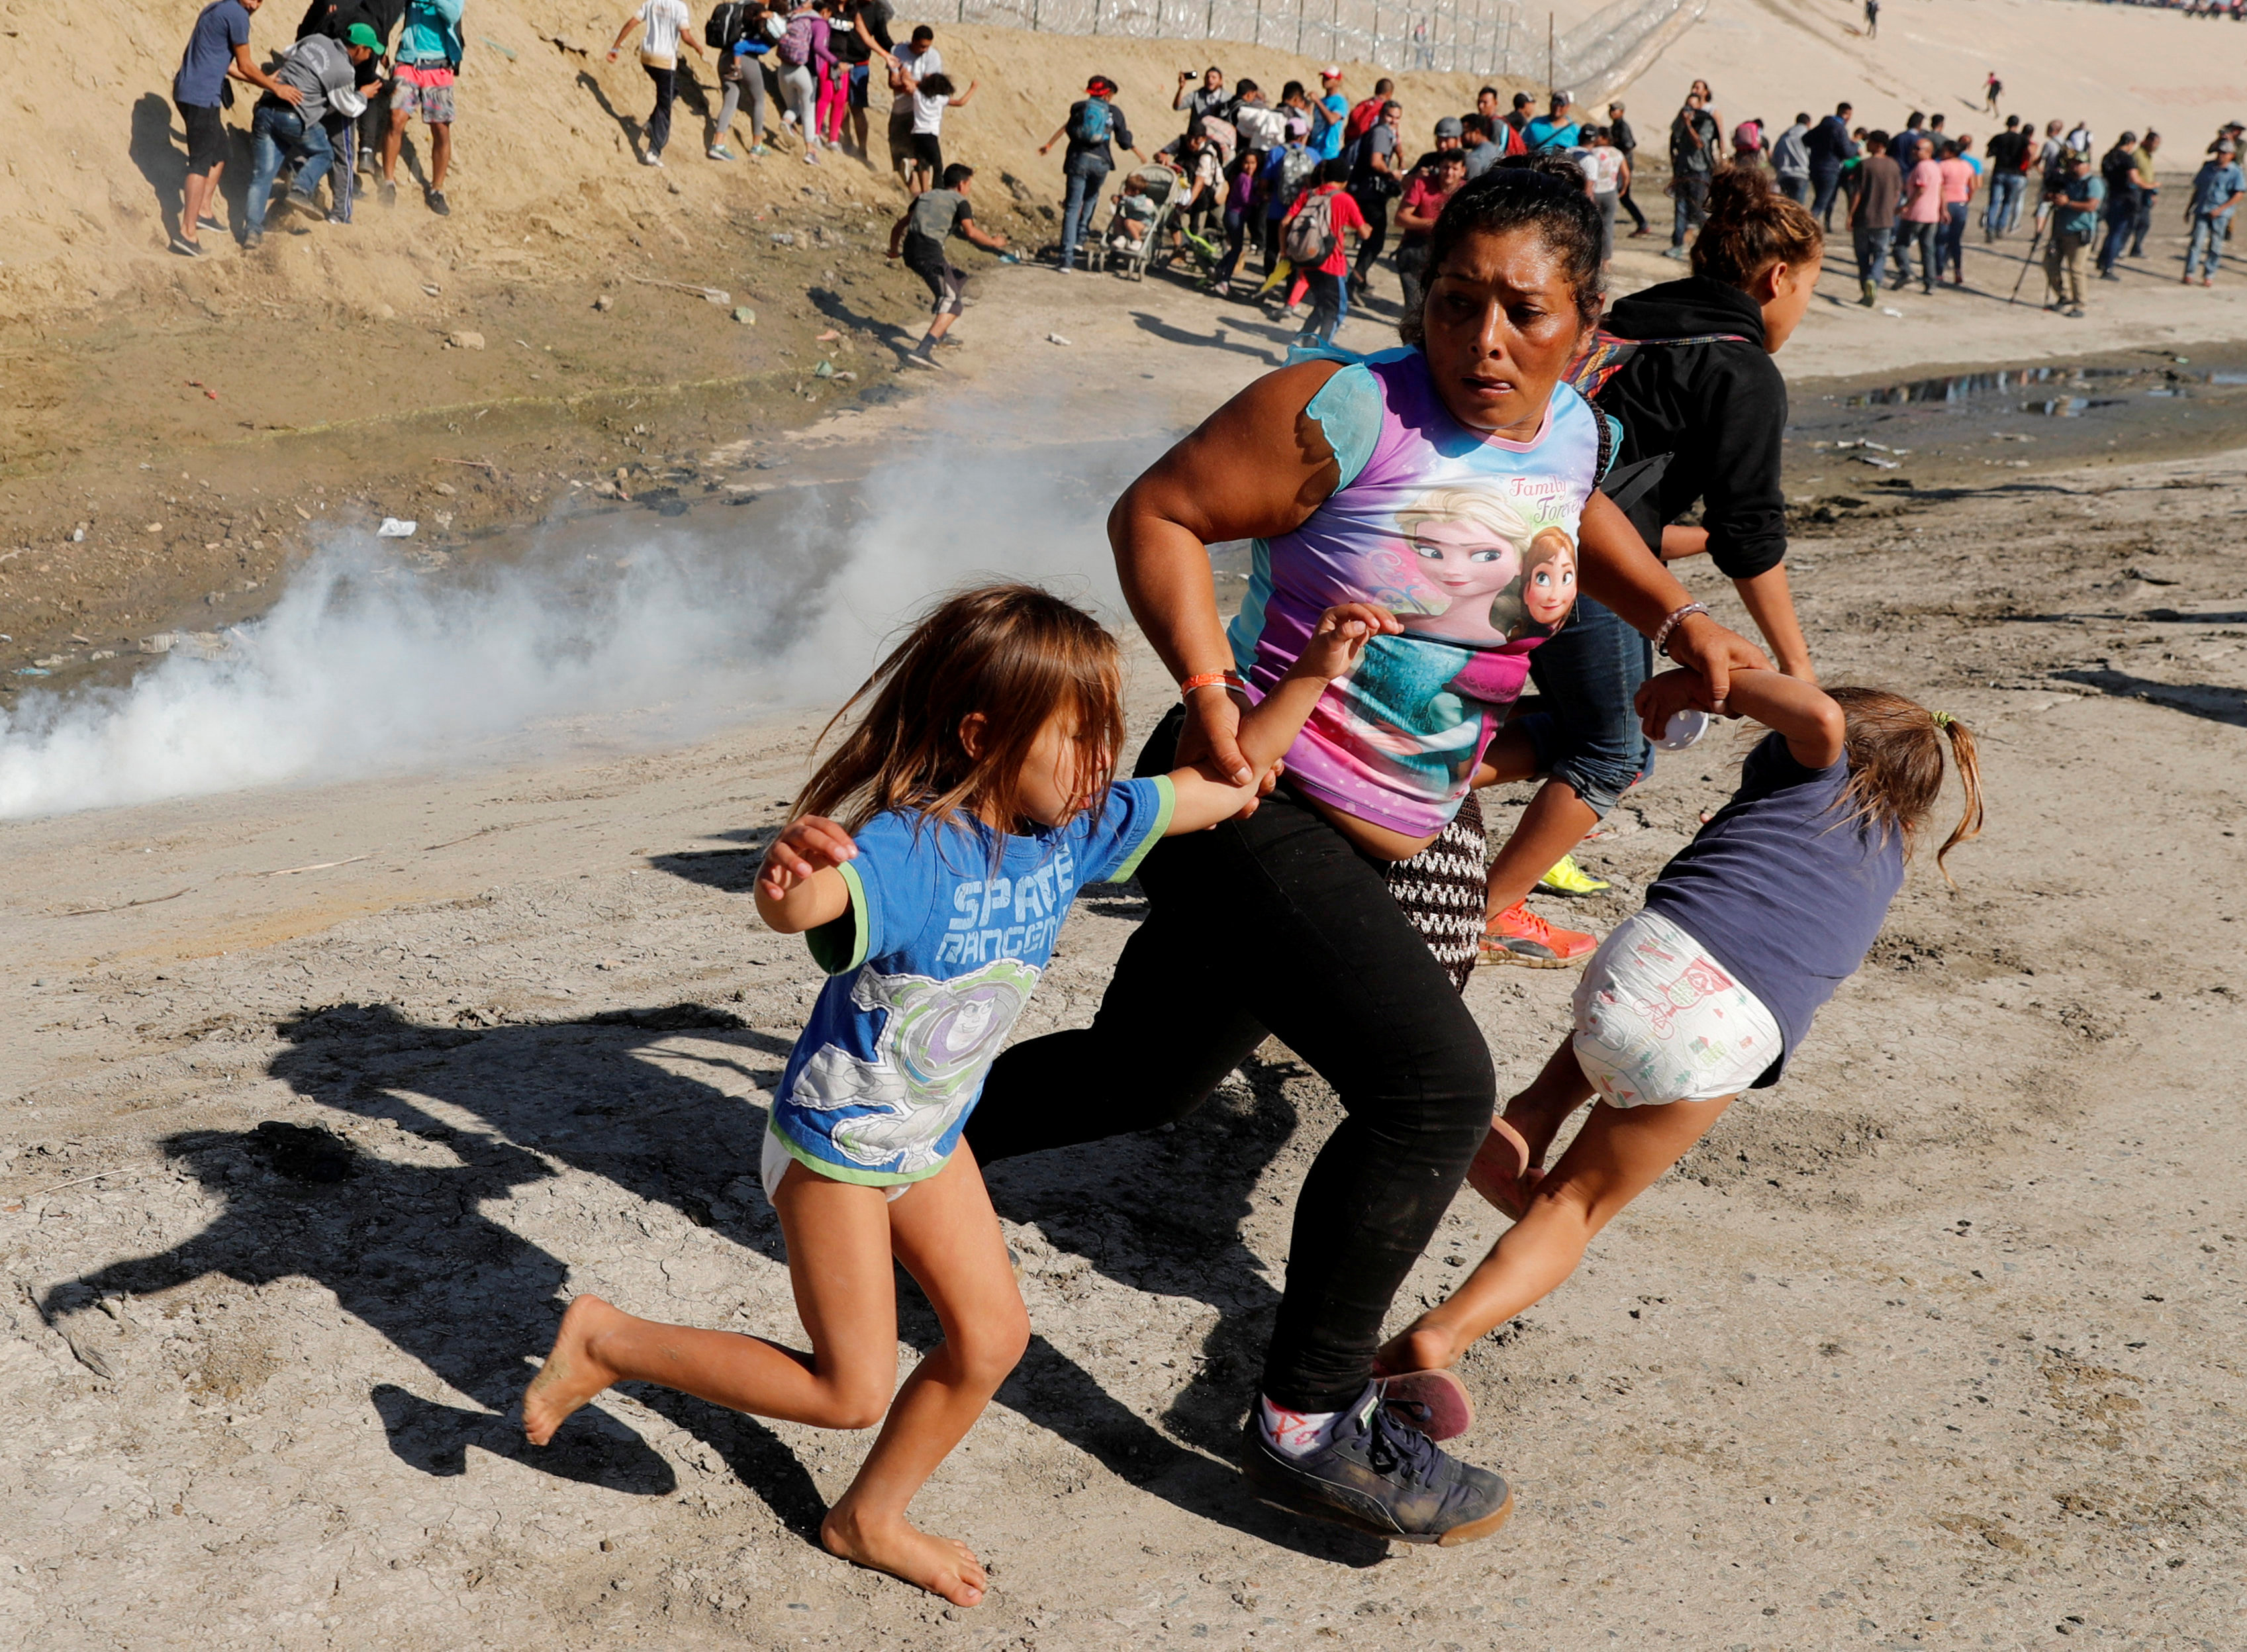 Christians Decry Trump Administration After Children Are Tear-Gassed At Border